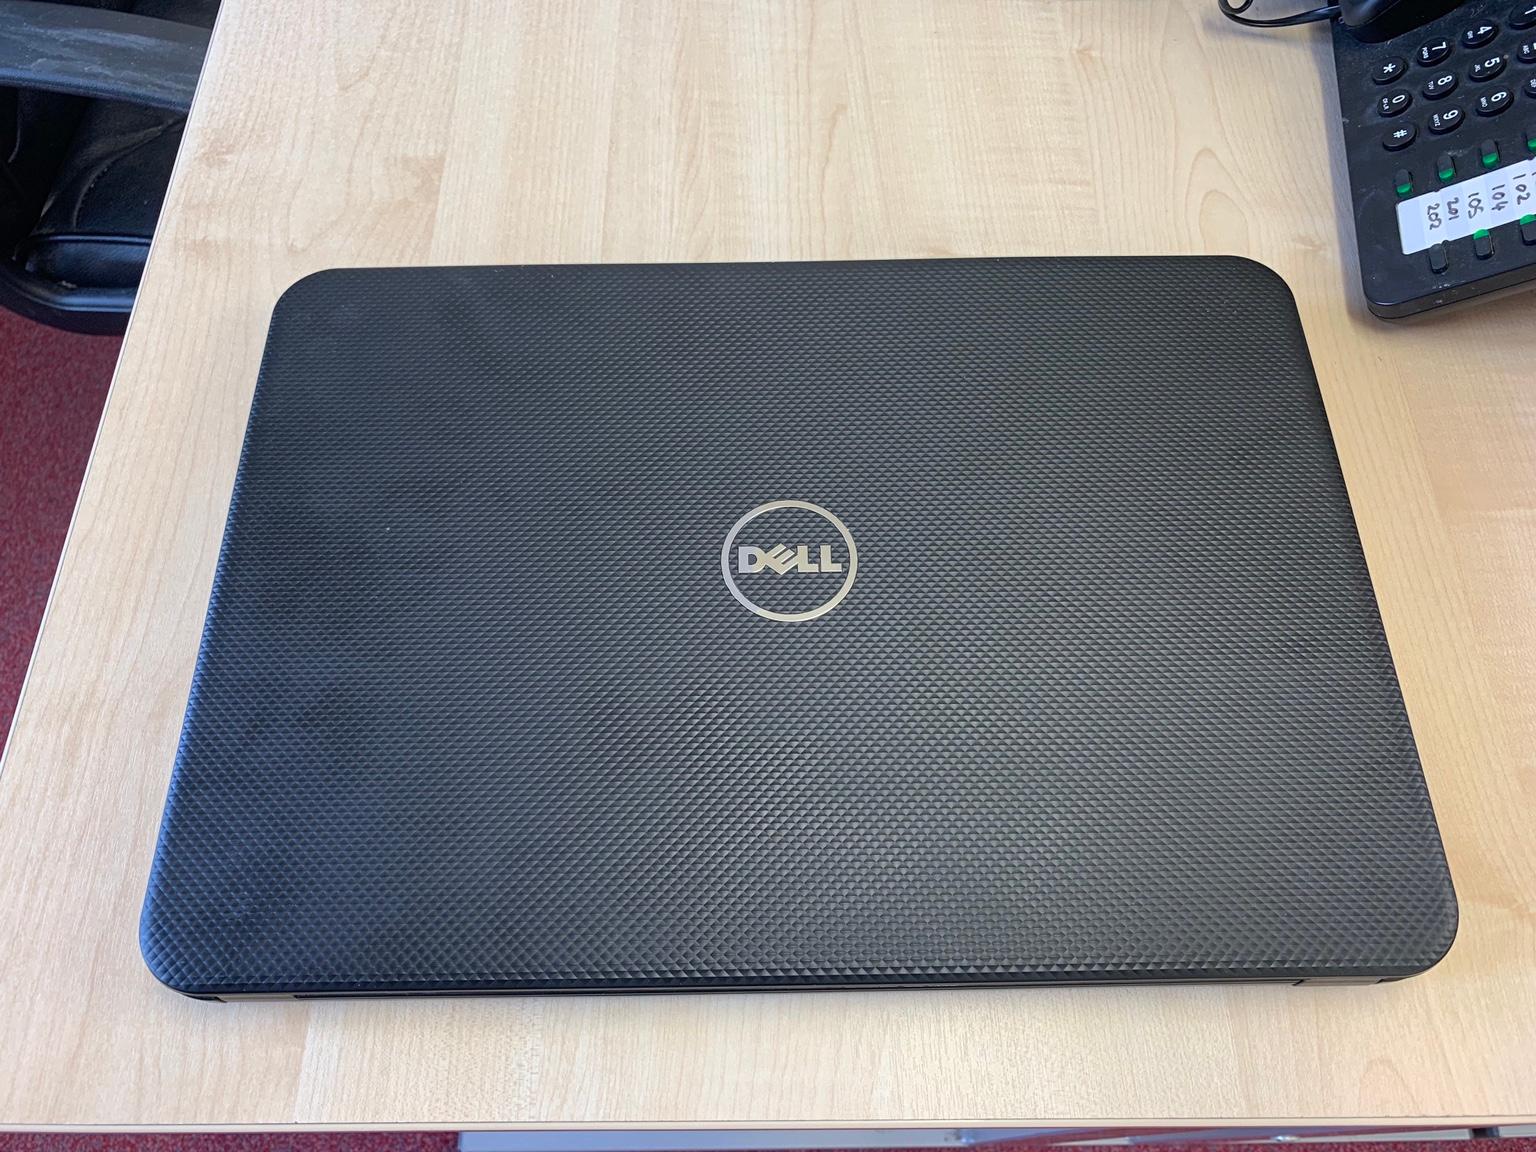 factory reset a dell inspiron laptop